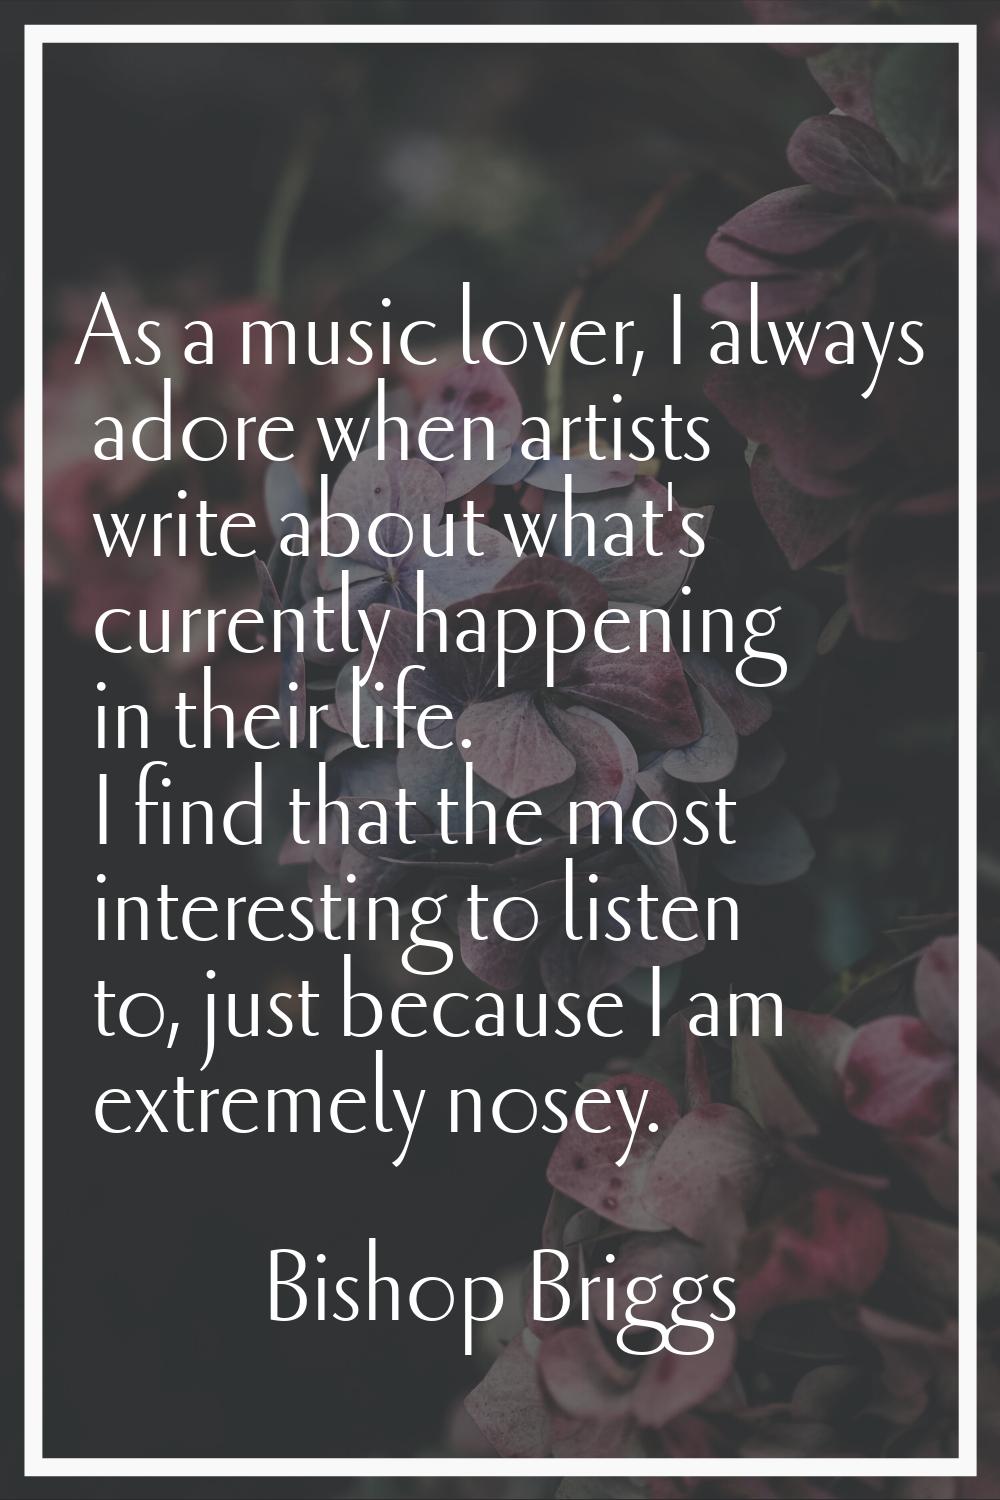 As a music lover, I always adore when artists write about what's currently happening in their life.